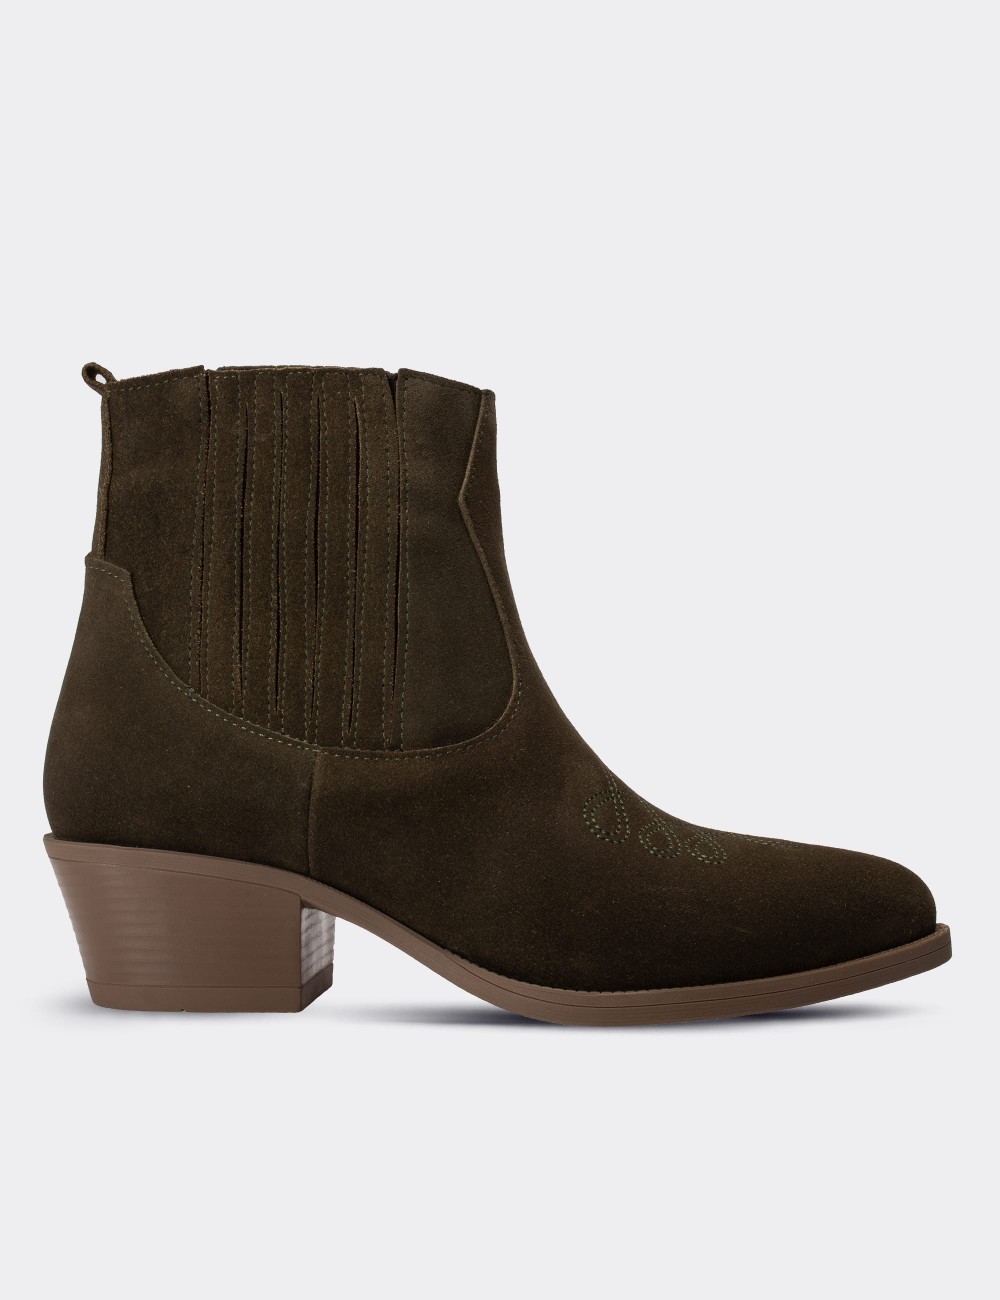 Green Suede Leather Boots - E8100ZHAKC01